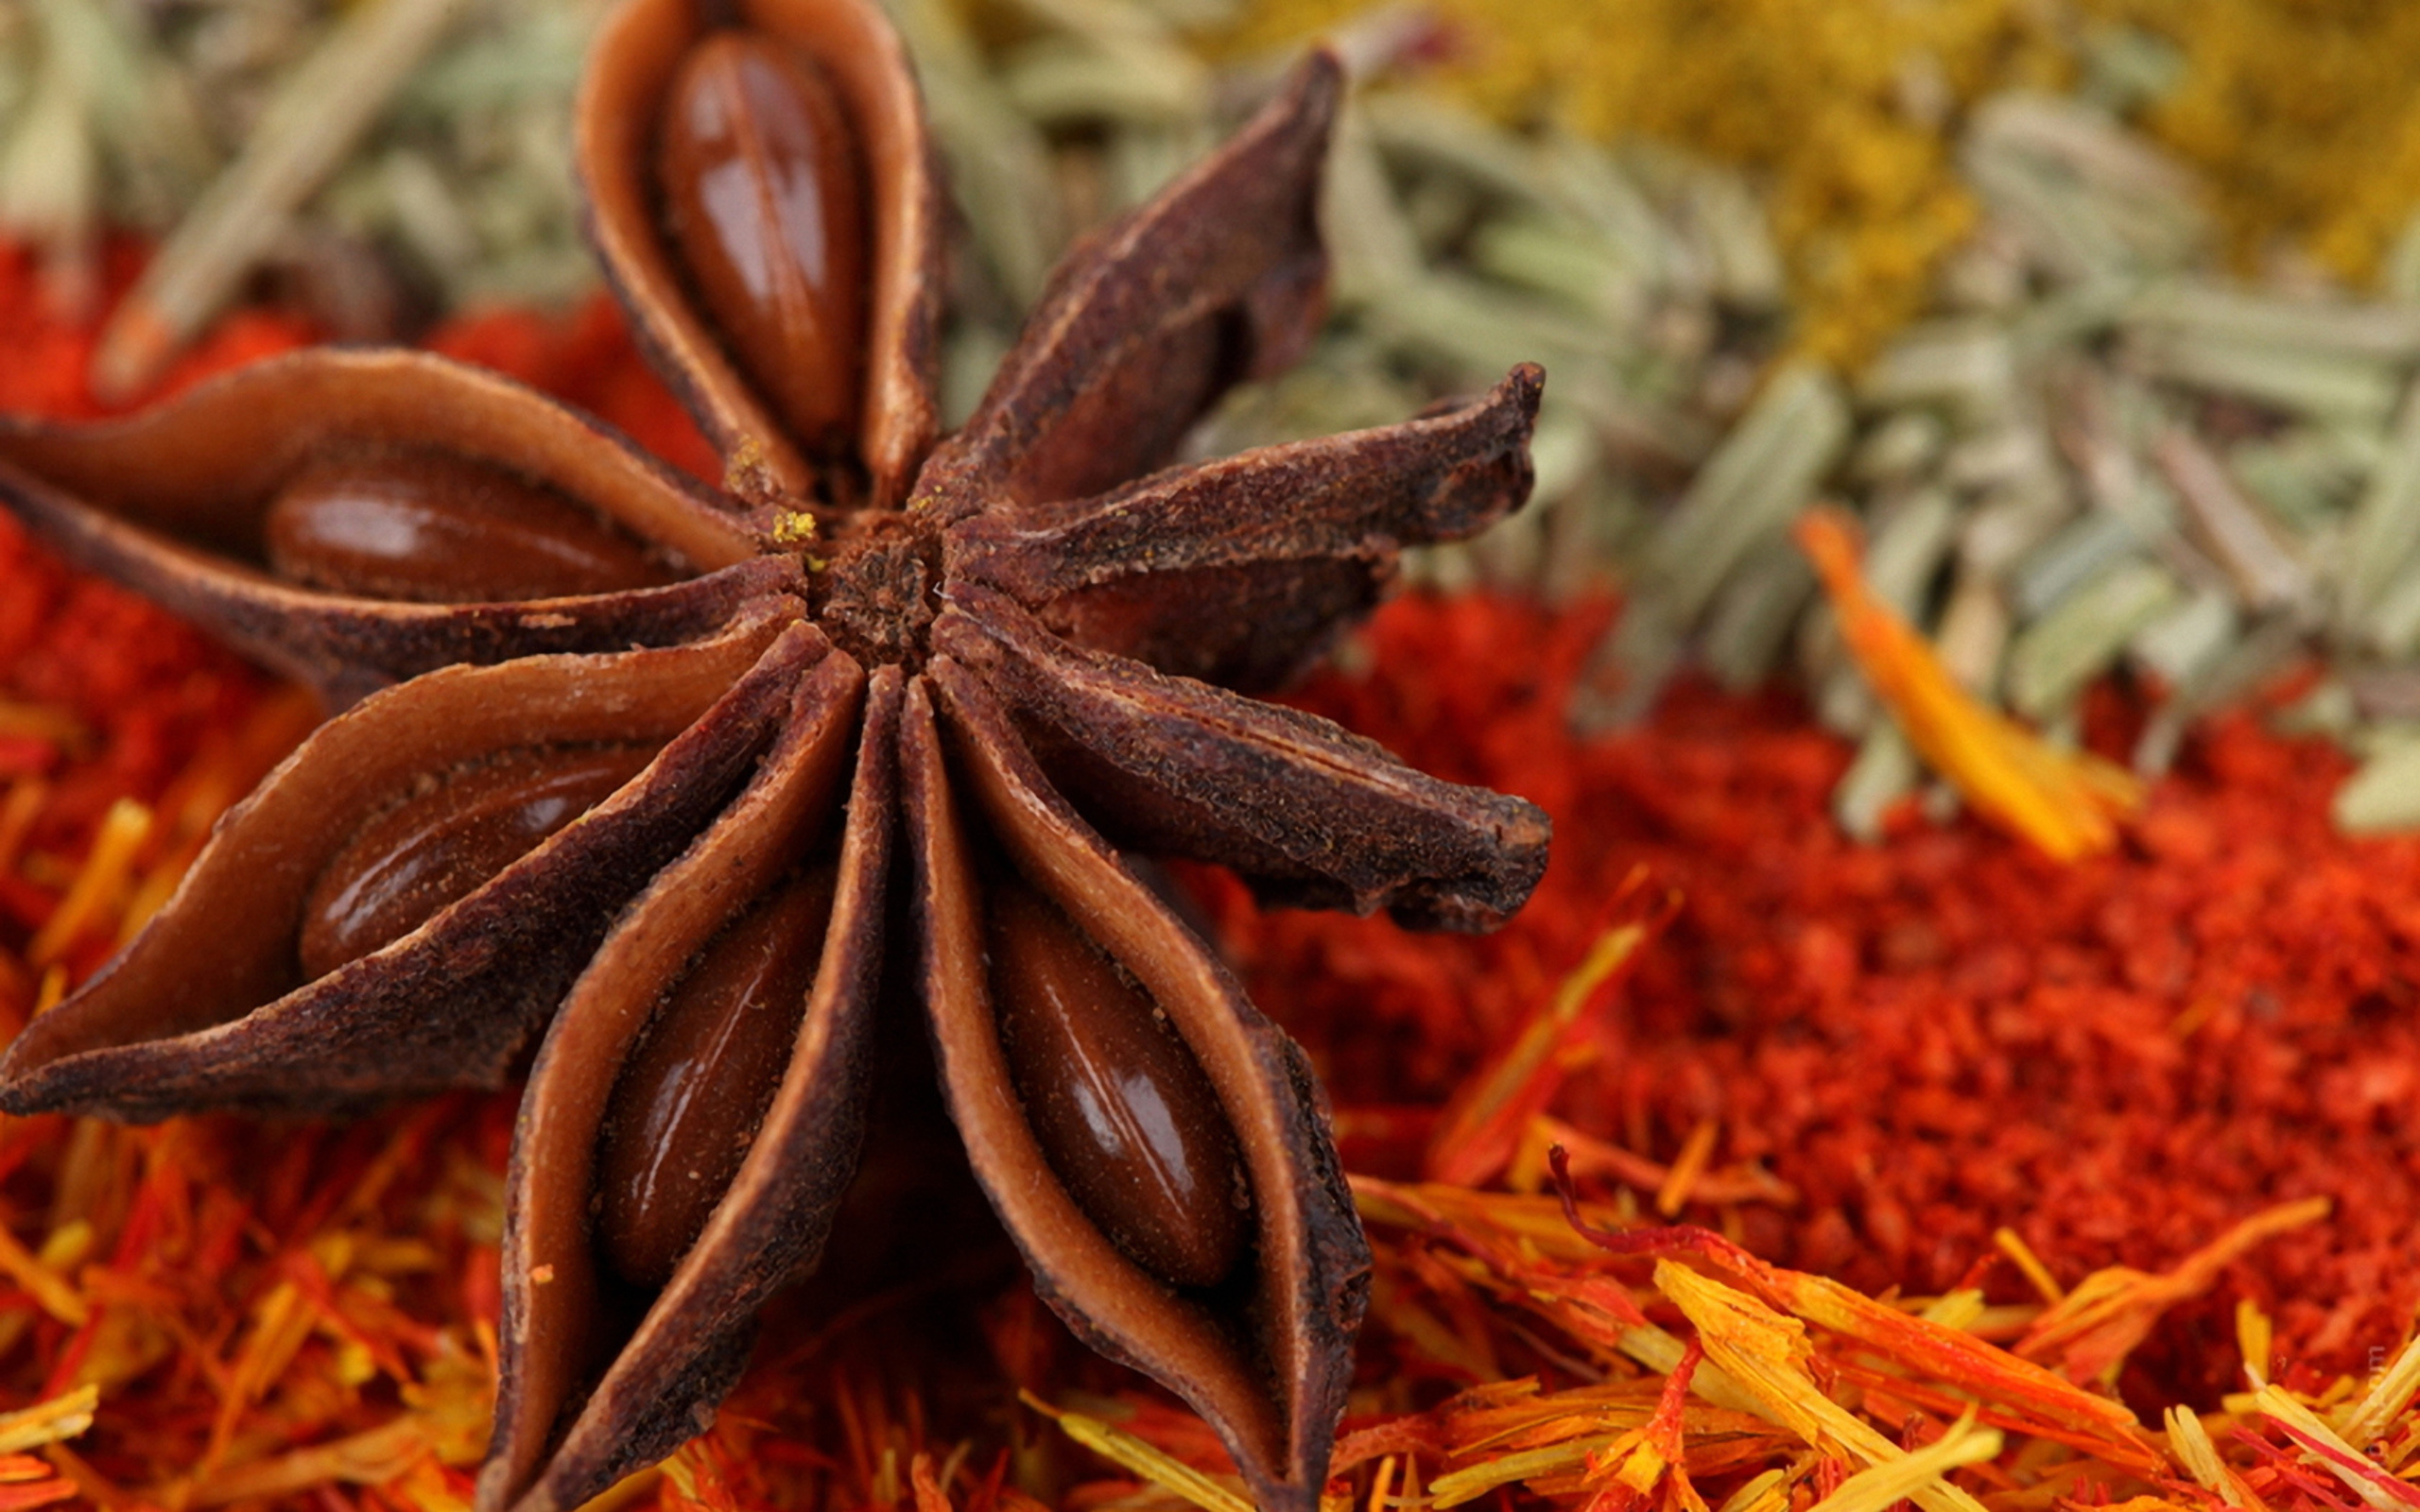 Herbs and spices, Culinary collection, Flavorful ingredients, Aromatic blend, 2560x1600 HD Desktop